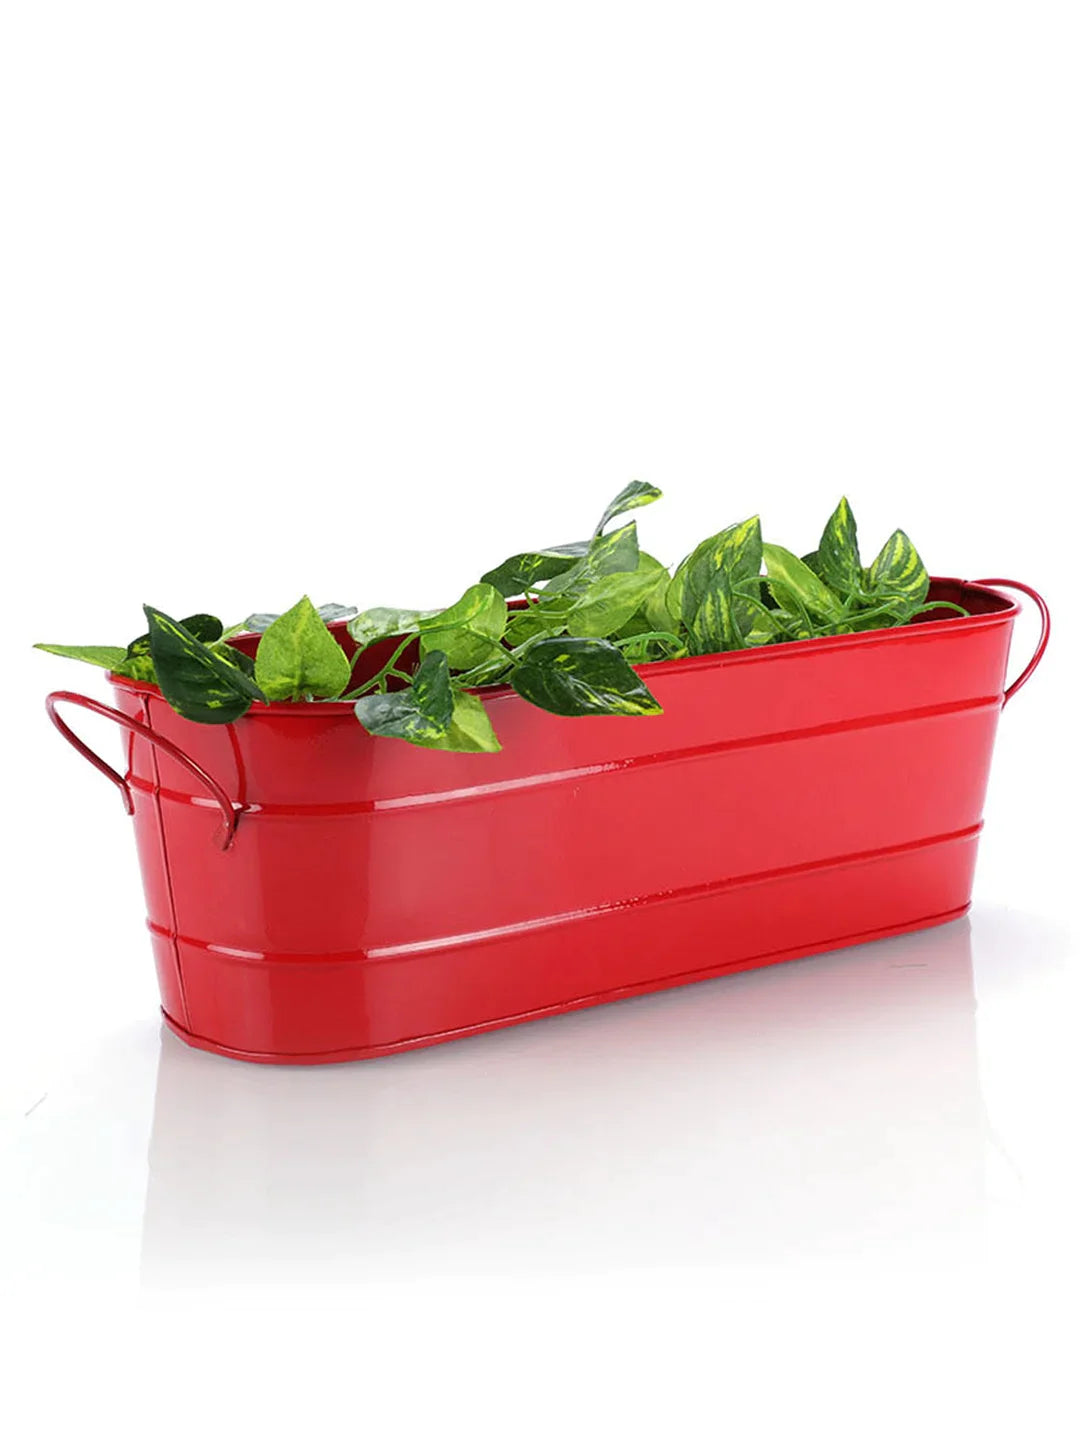 Oval Planter Large Red 16 Inches